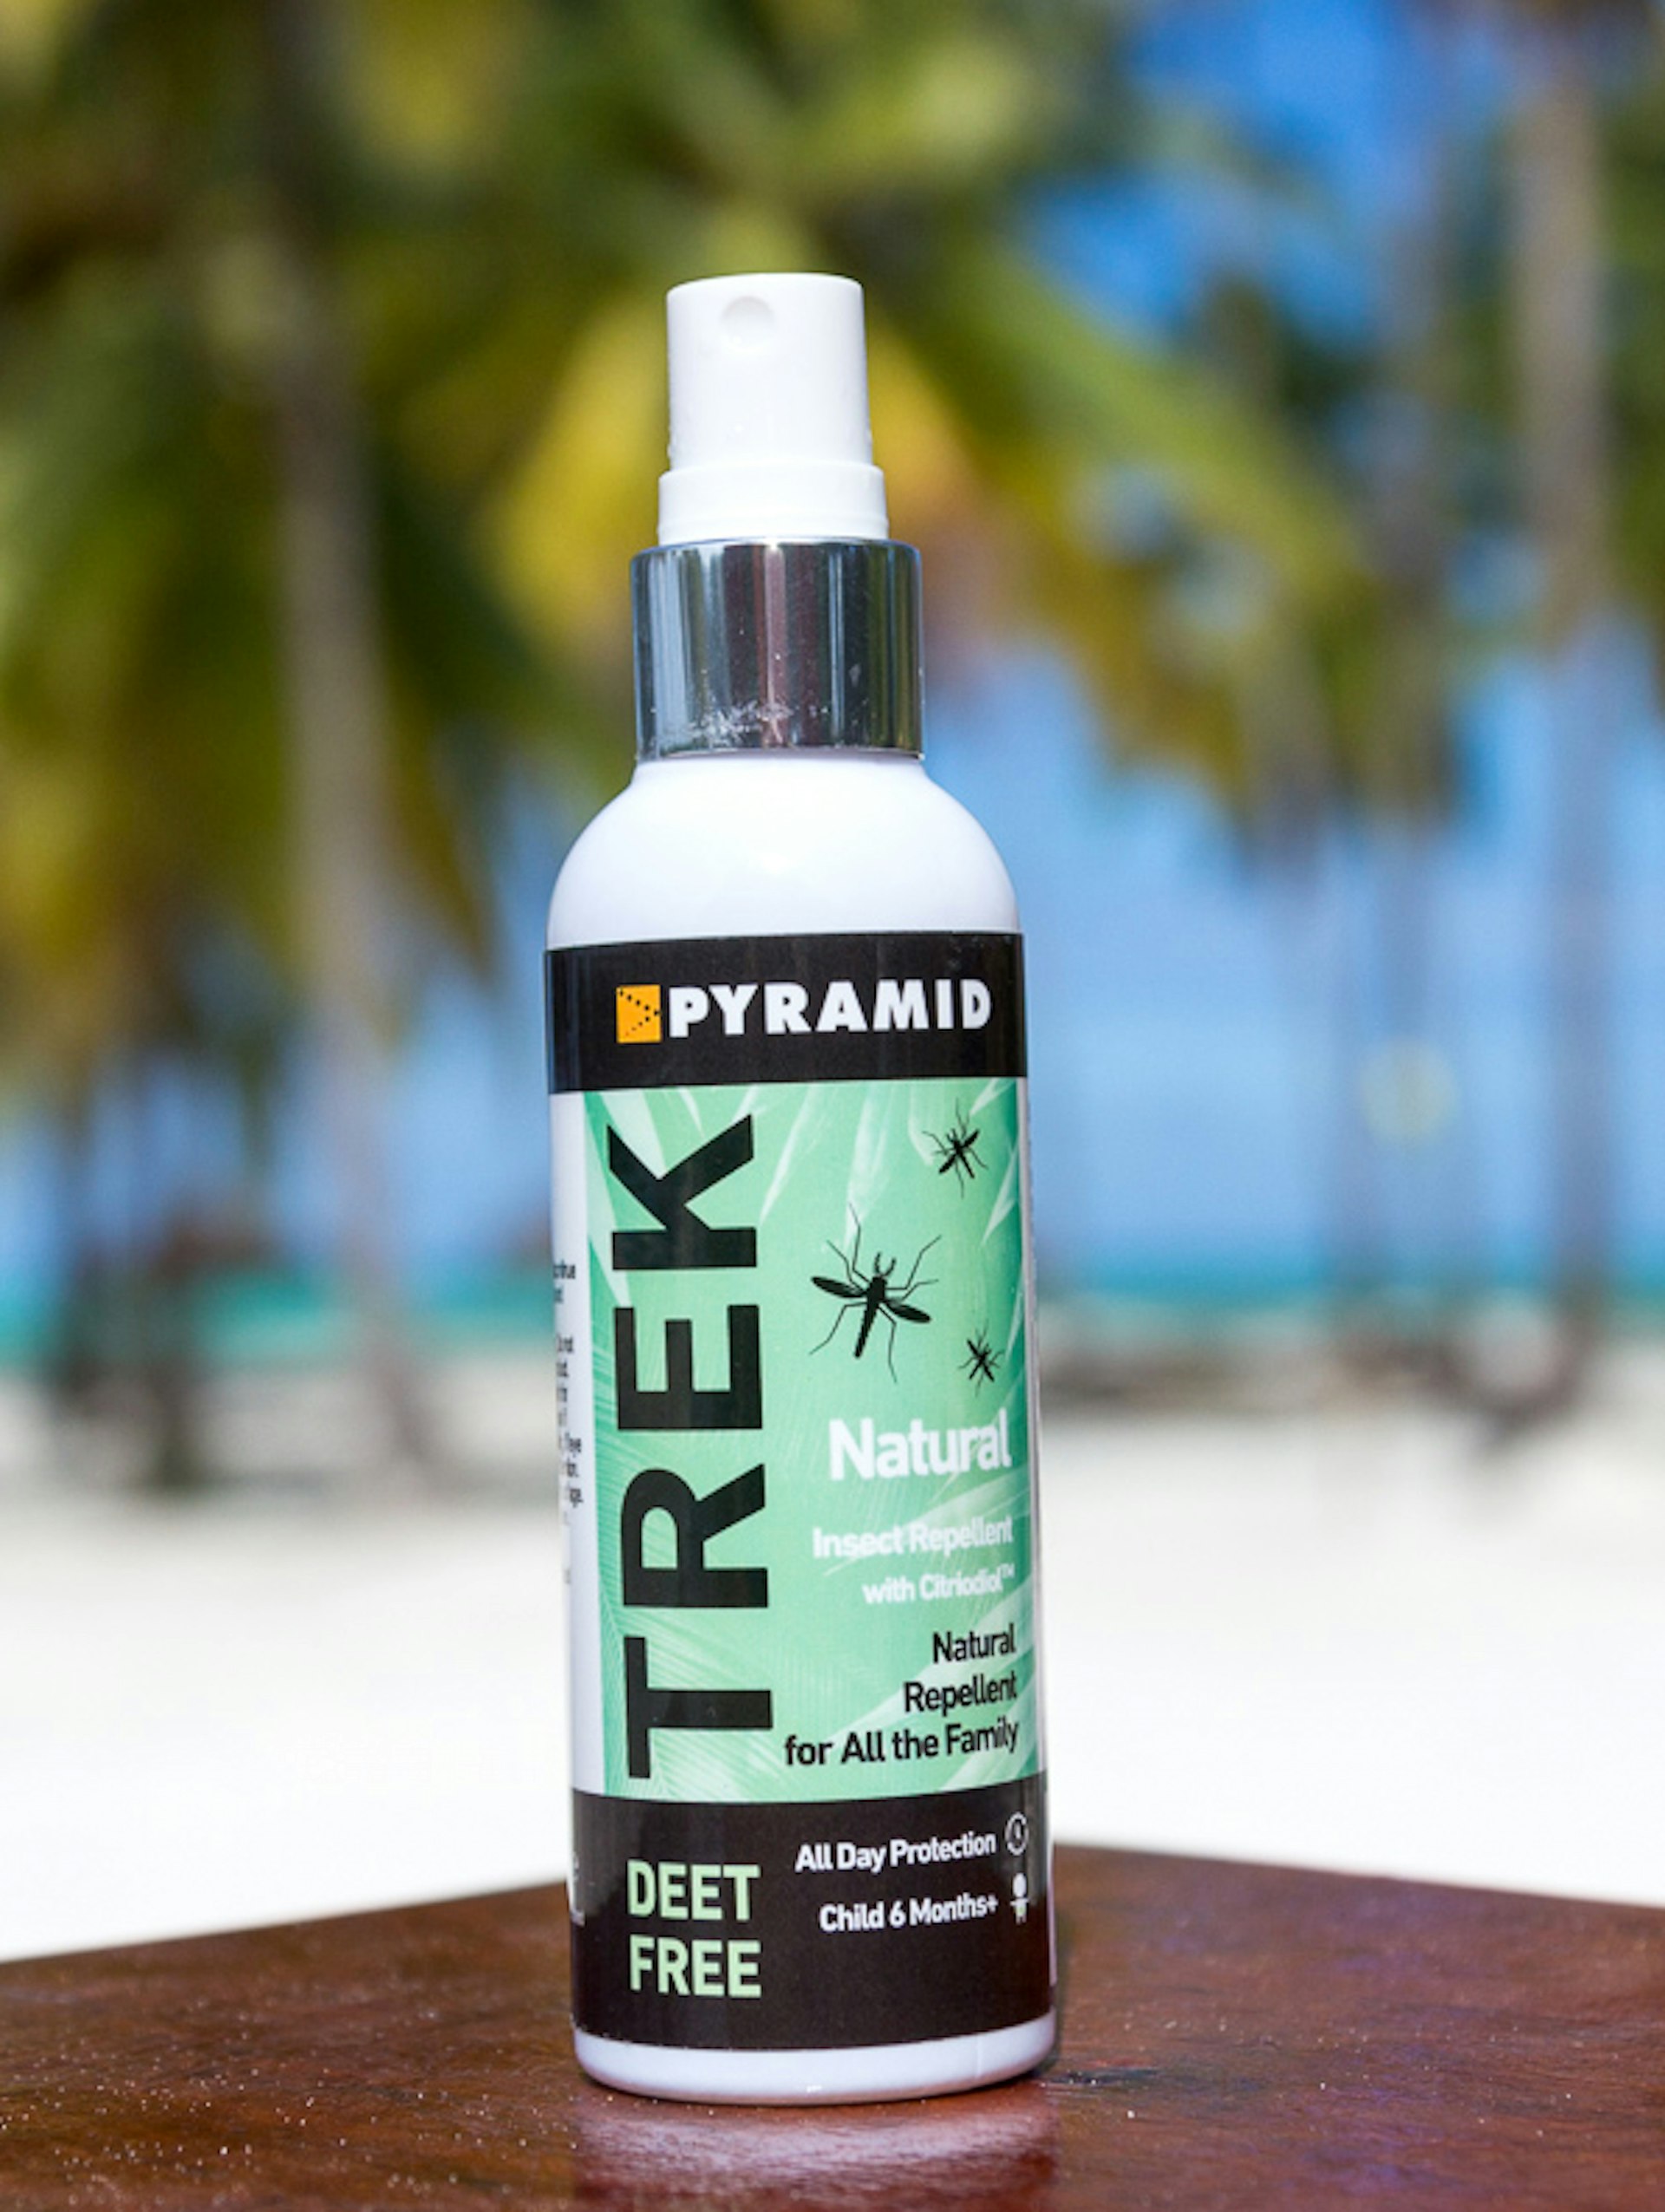 Pyramid Trek natural insect repellent © Peter Bennett / Lonely Planet